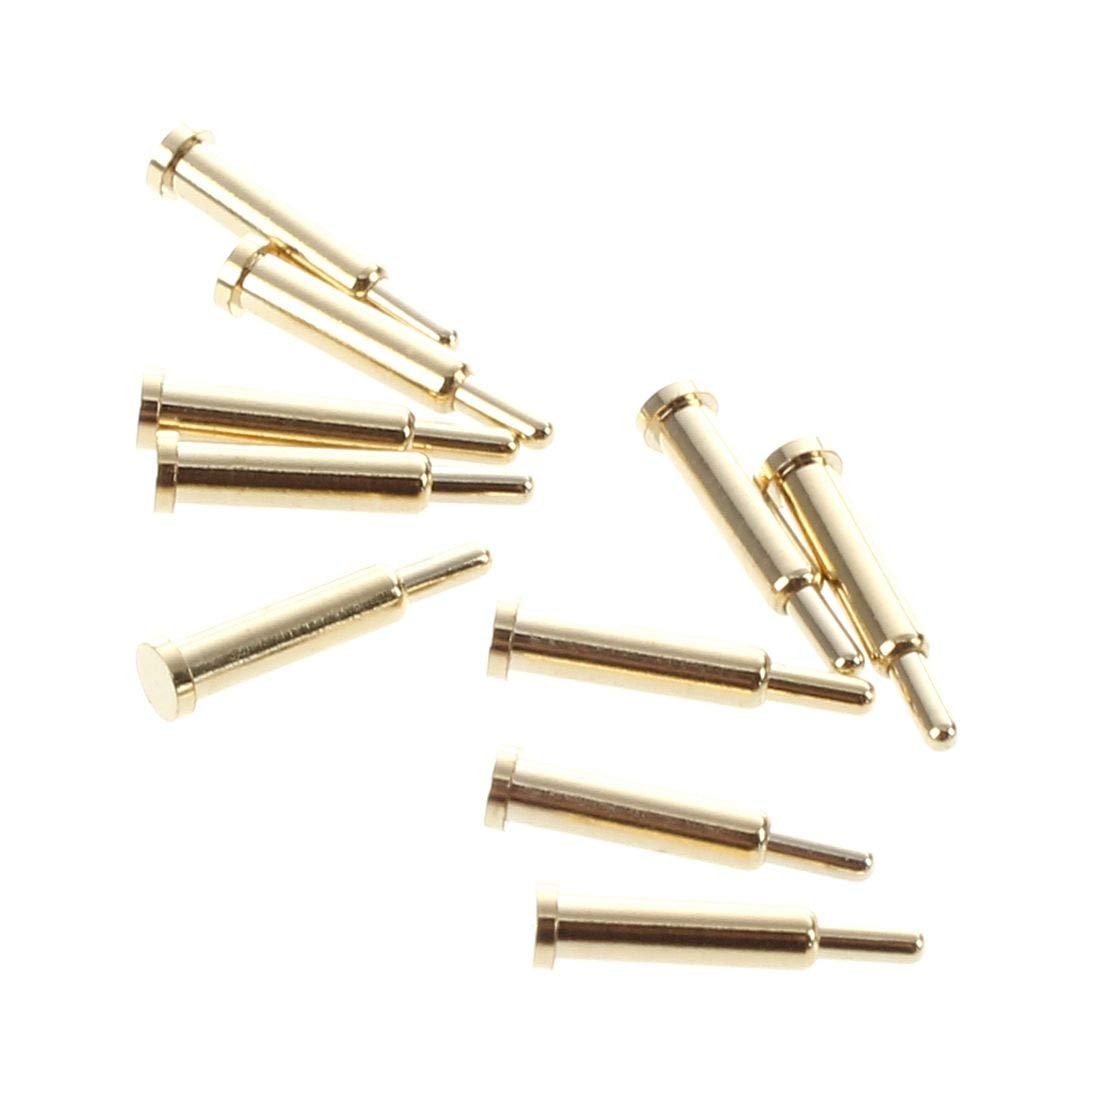 10 pcs spherical tipped spring loaded probes testing pins 2